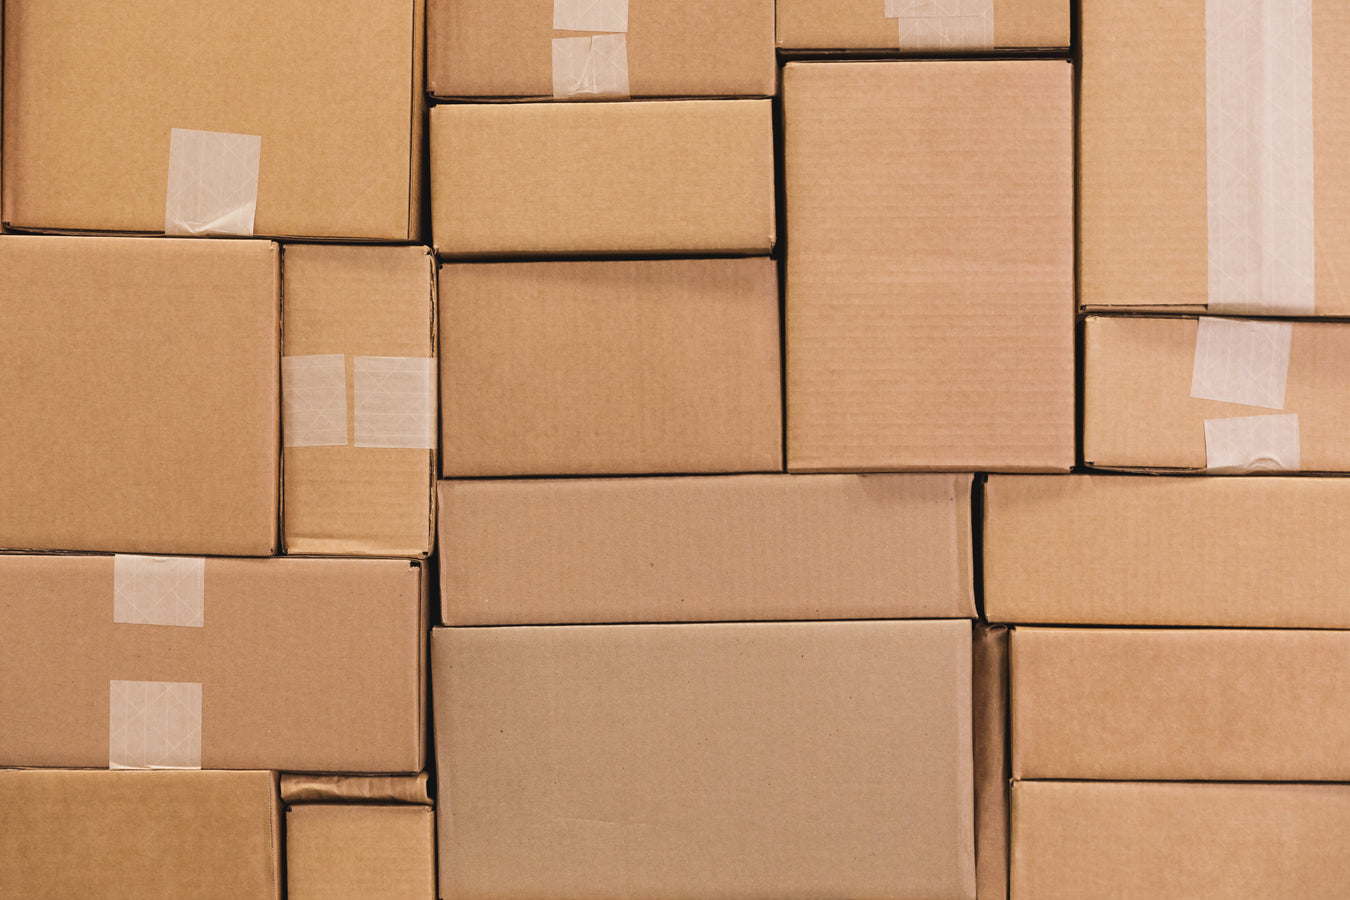 Mostly greyed-out picture of cardboard boxes stacked Tetris-style